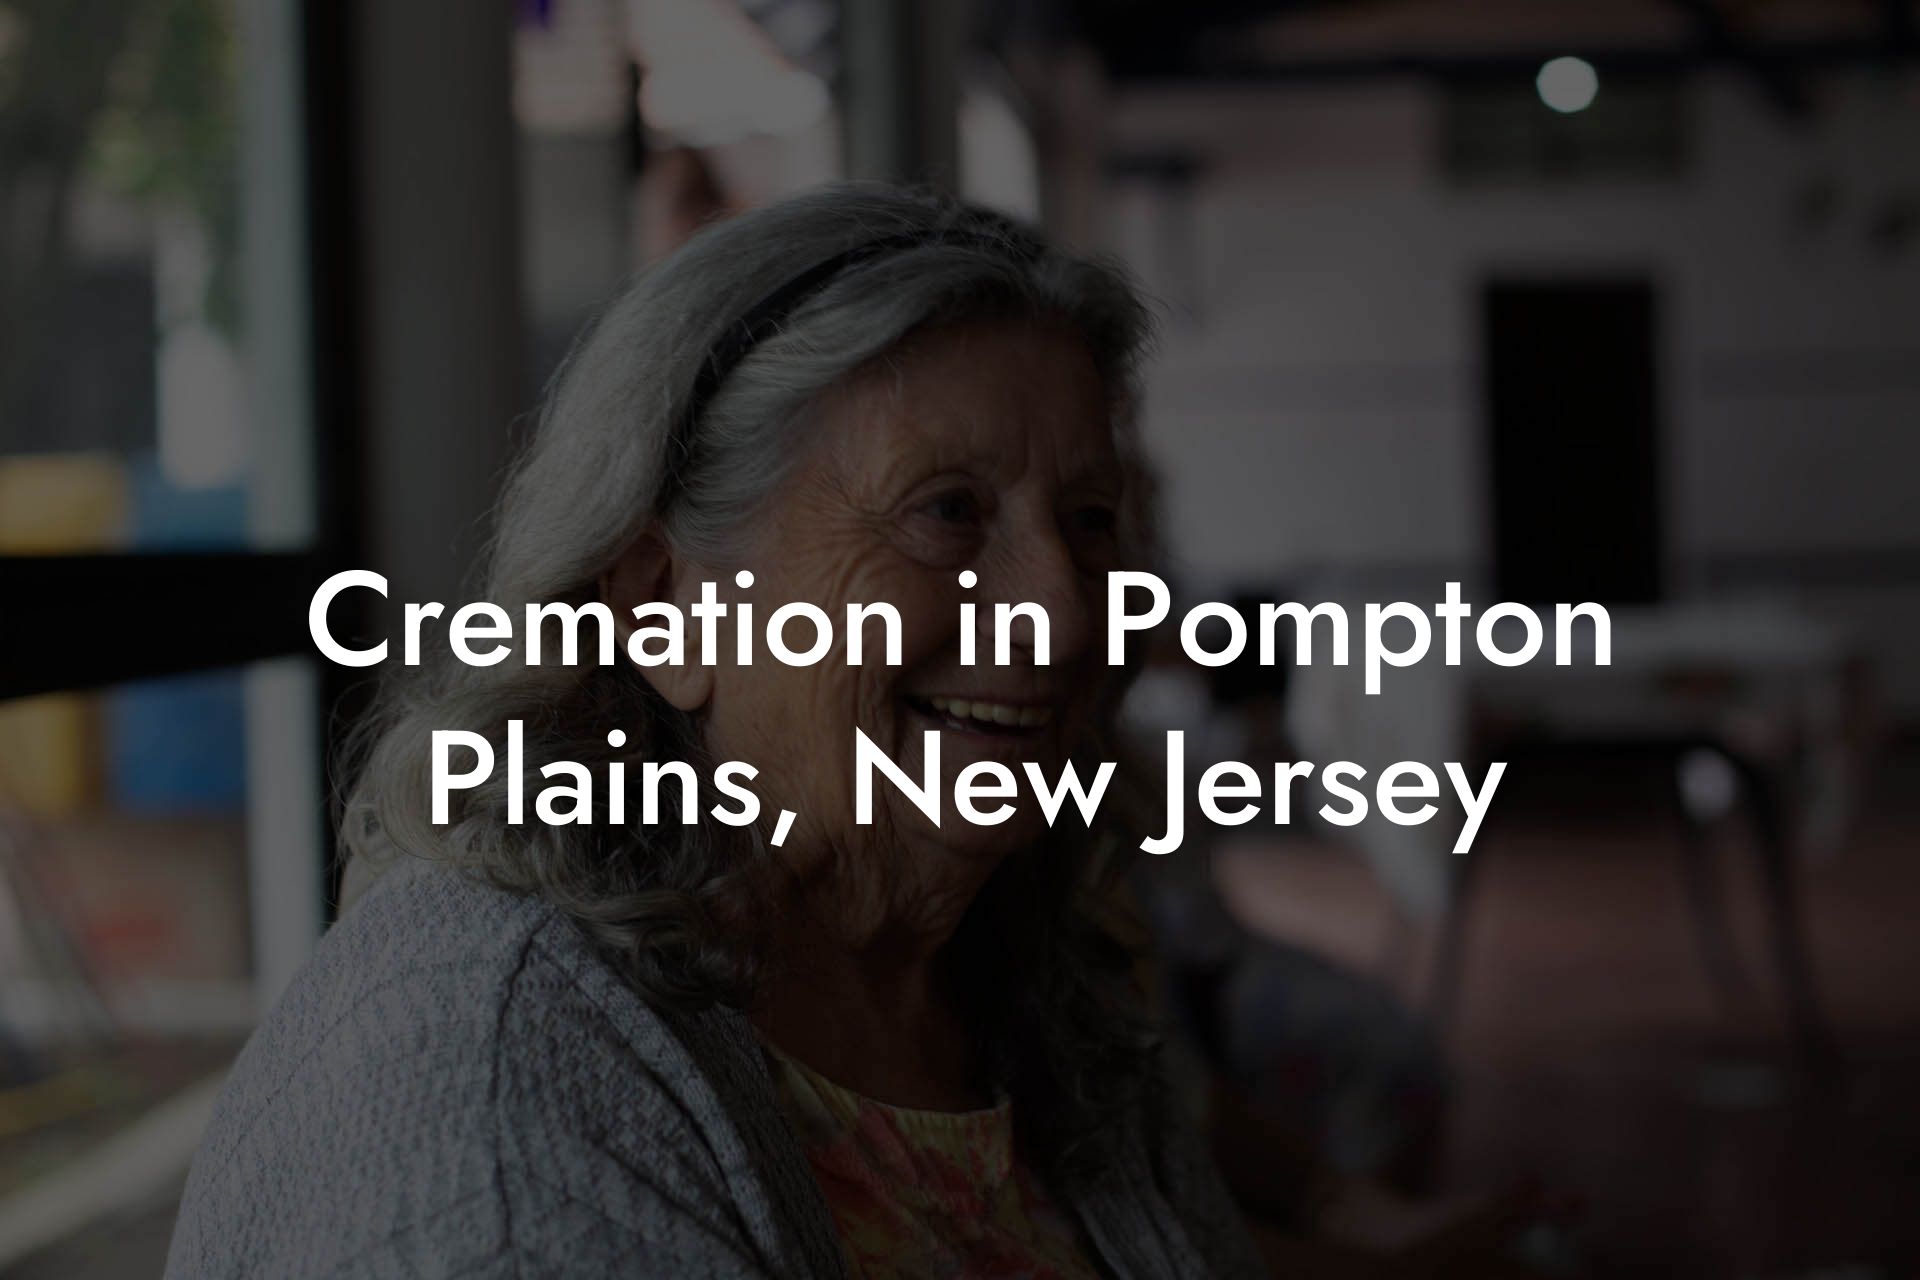 Cremation in Pompton Plains, New Jersey